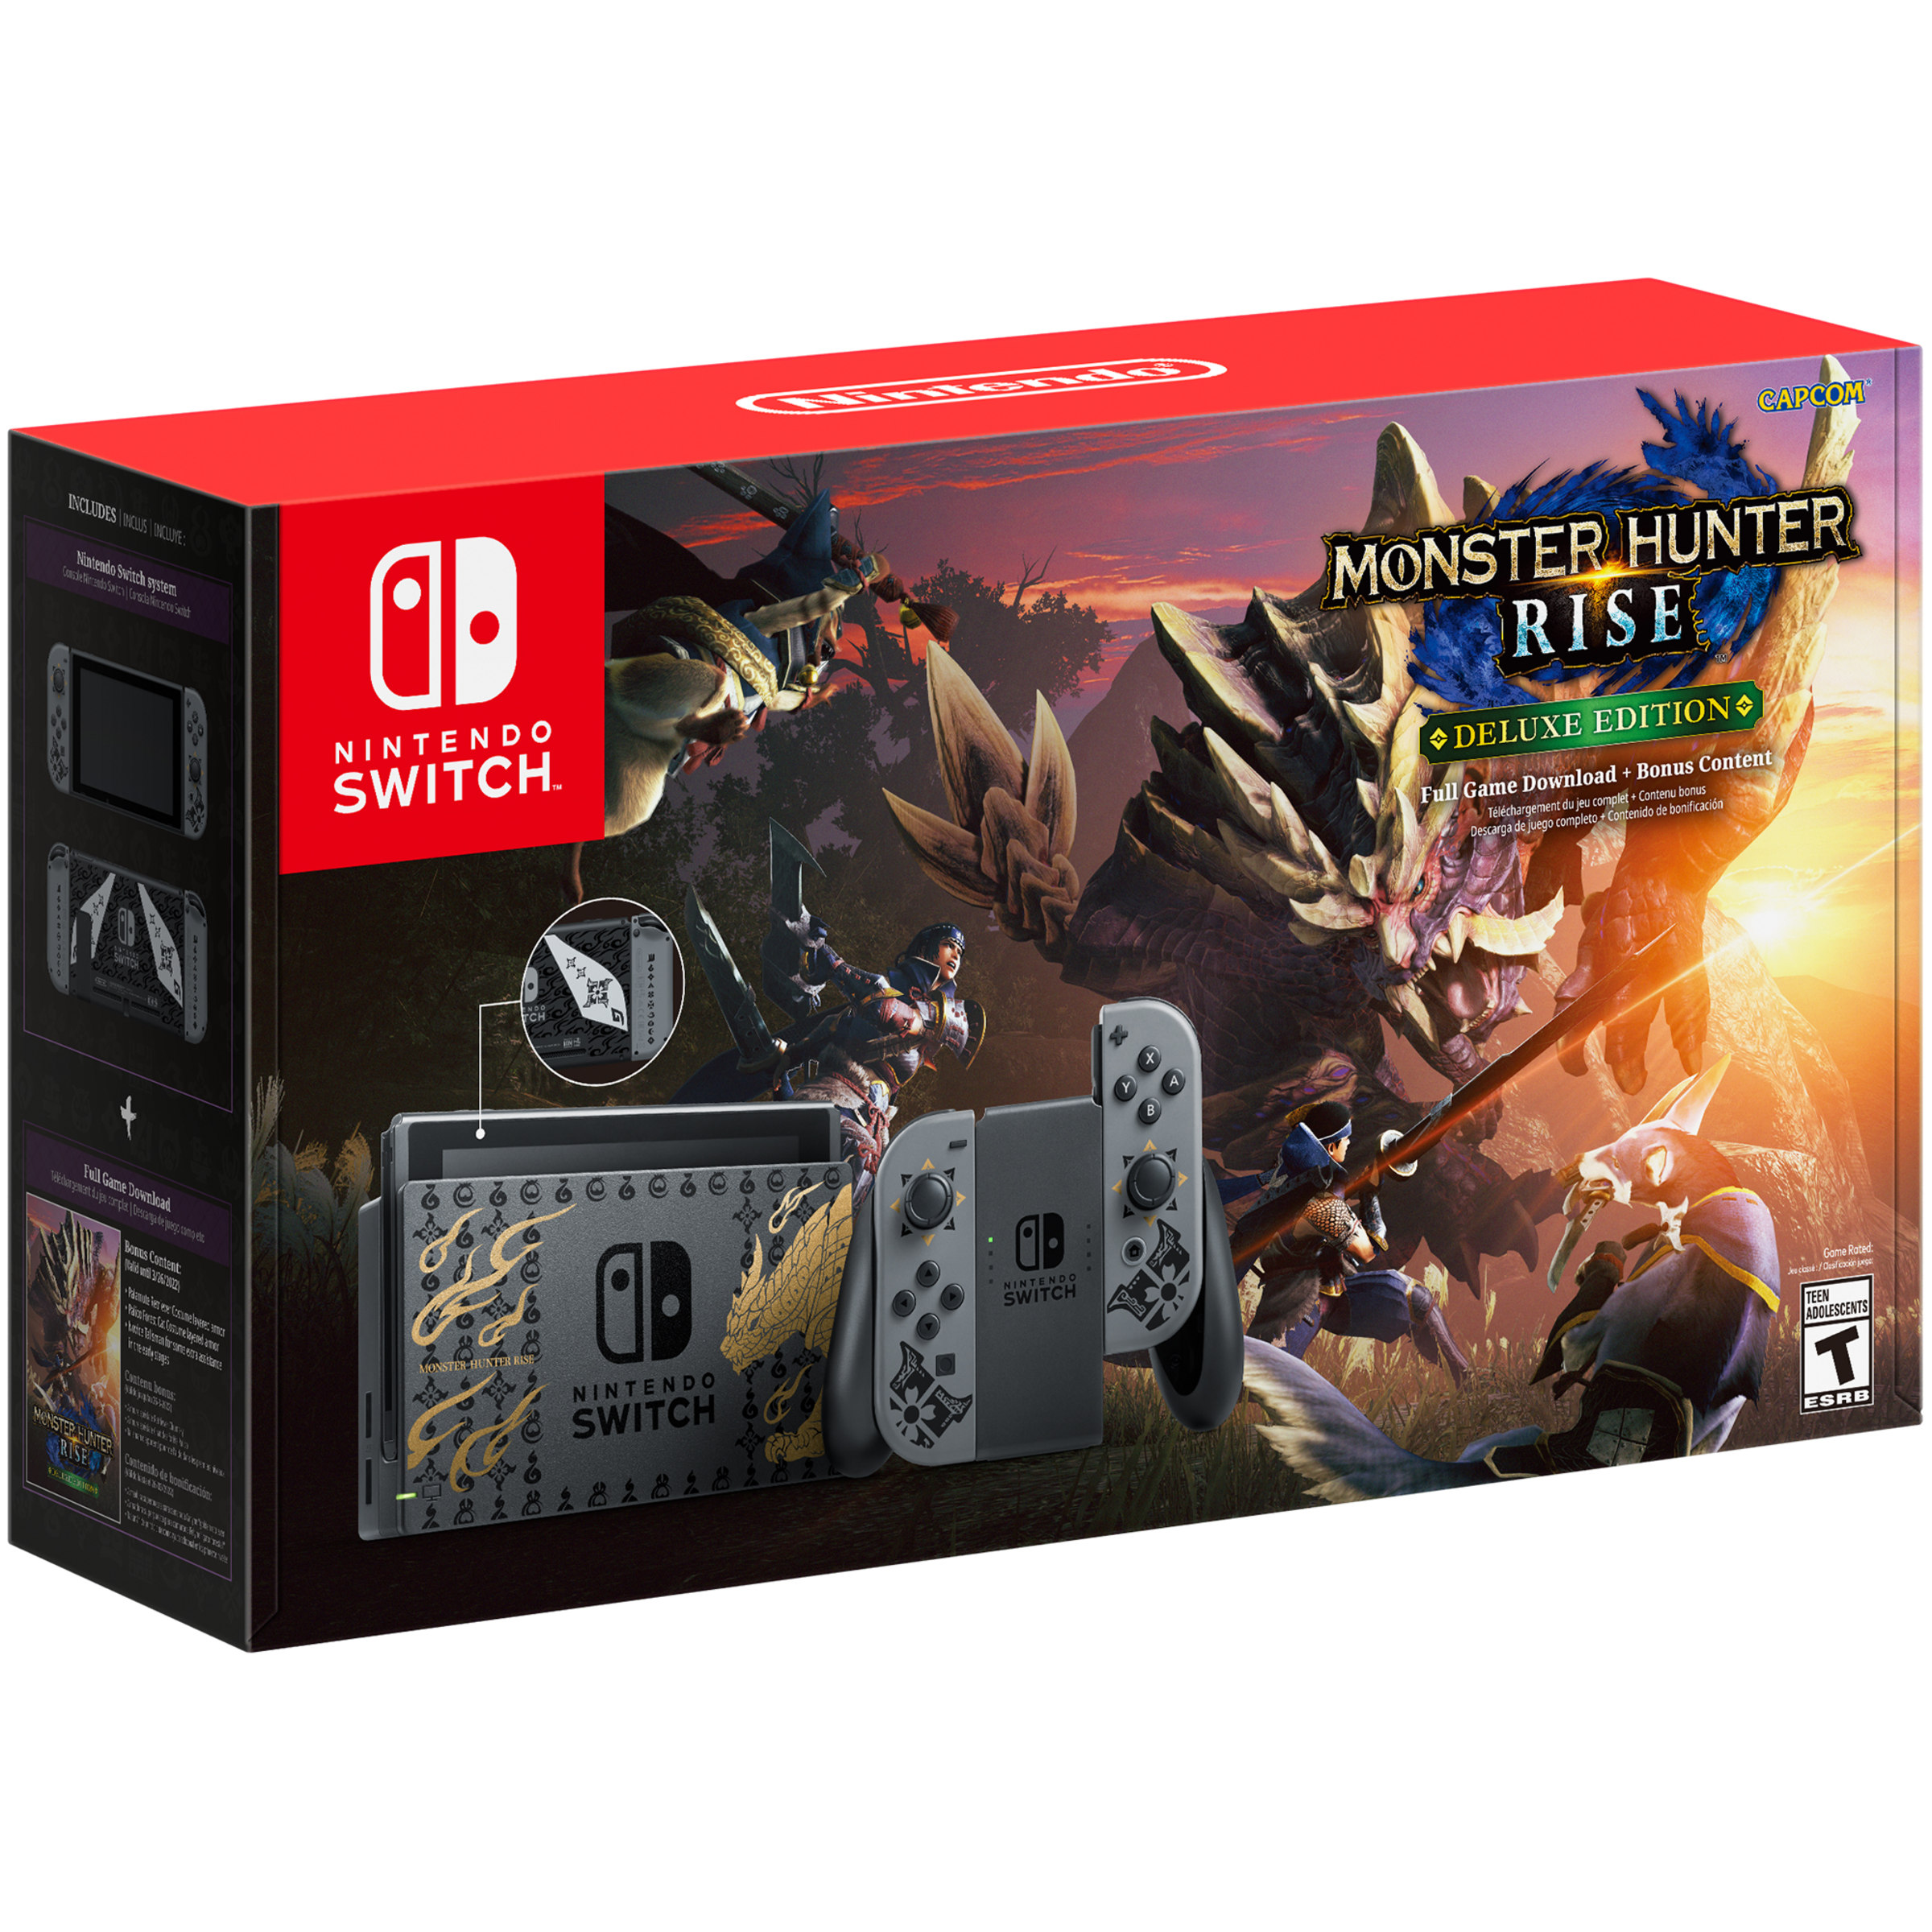 nintendo-switch-monster-hunter-rise-deluxe-edition-system-nintendo